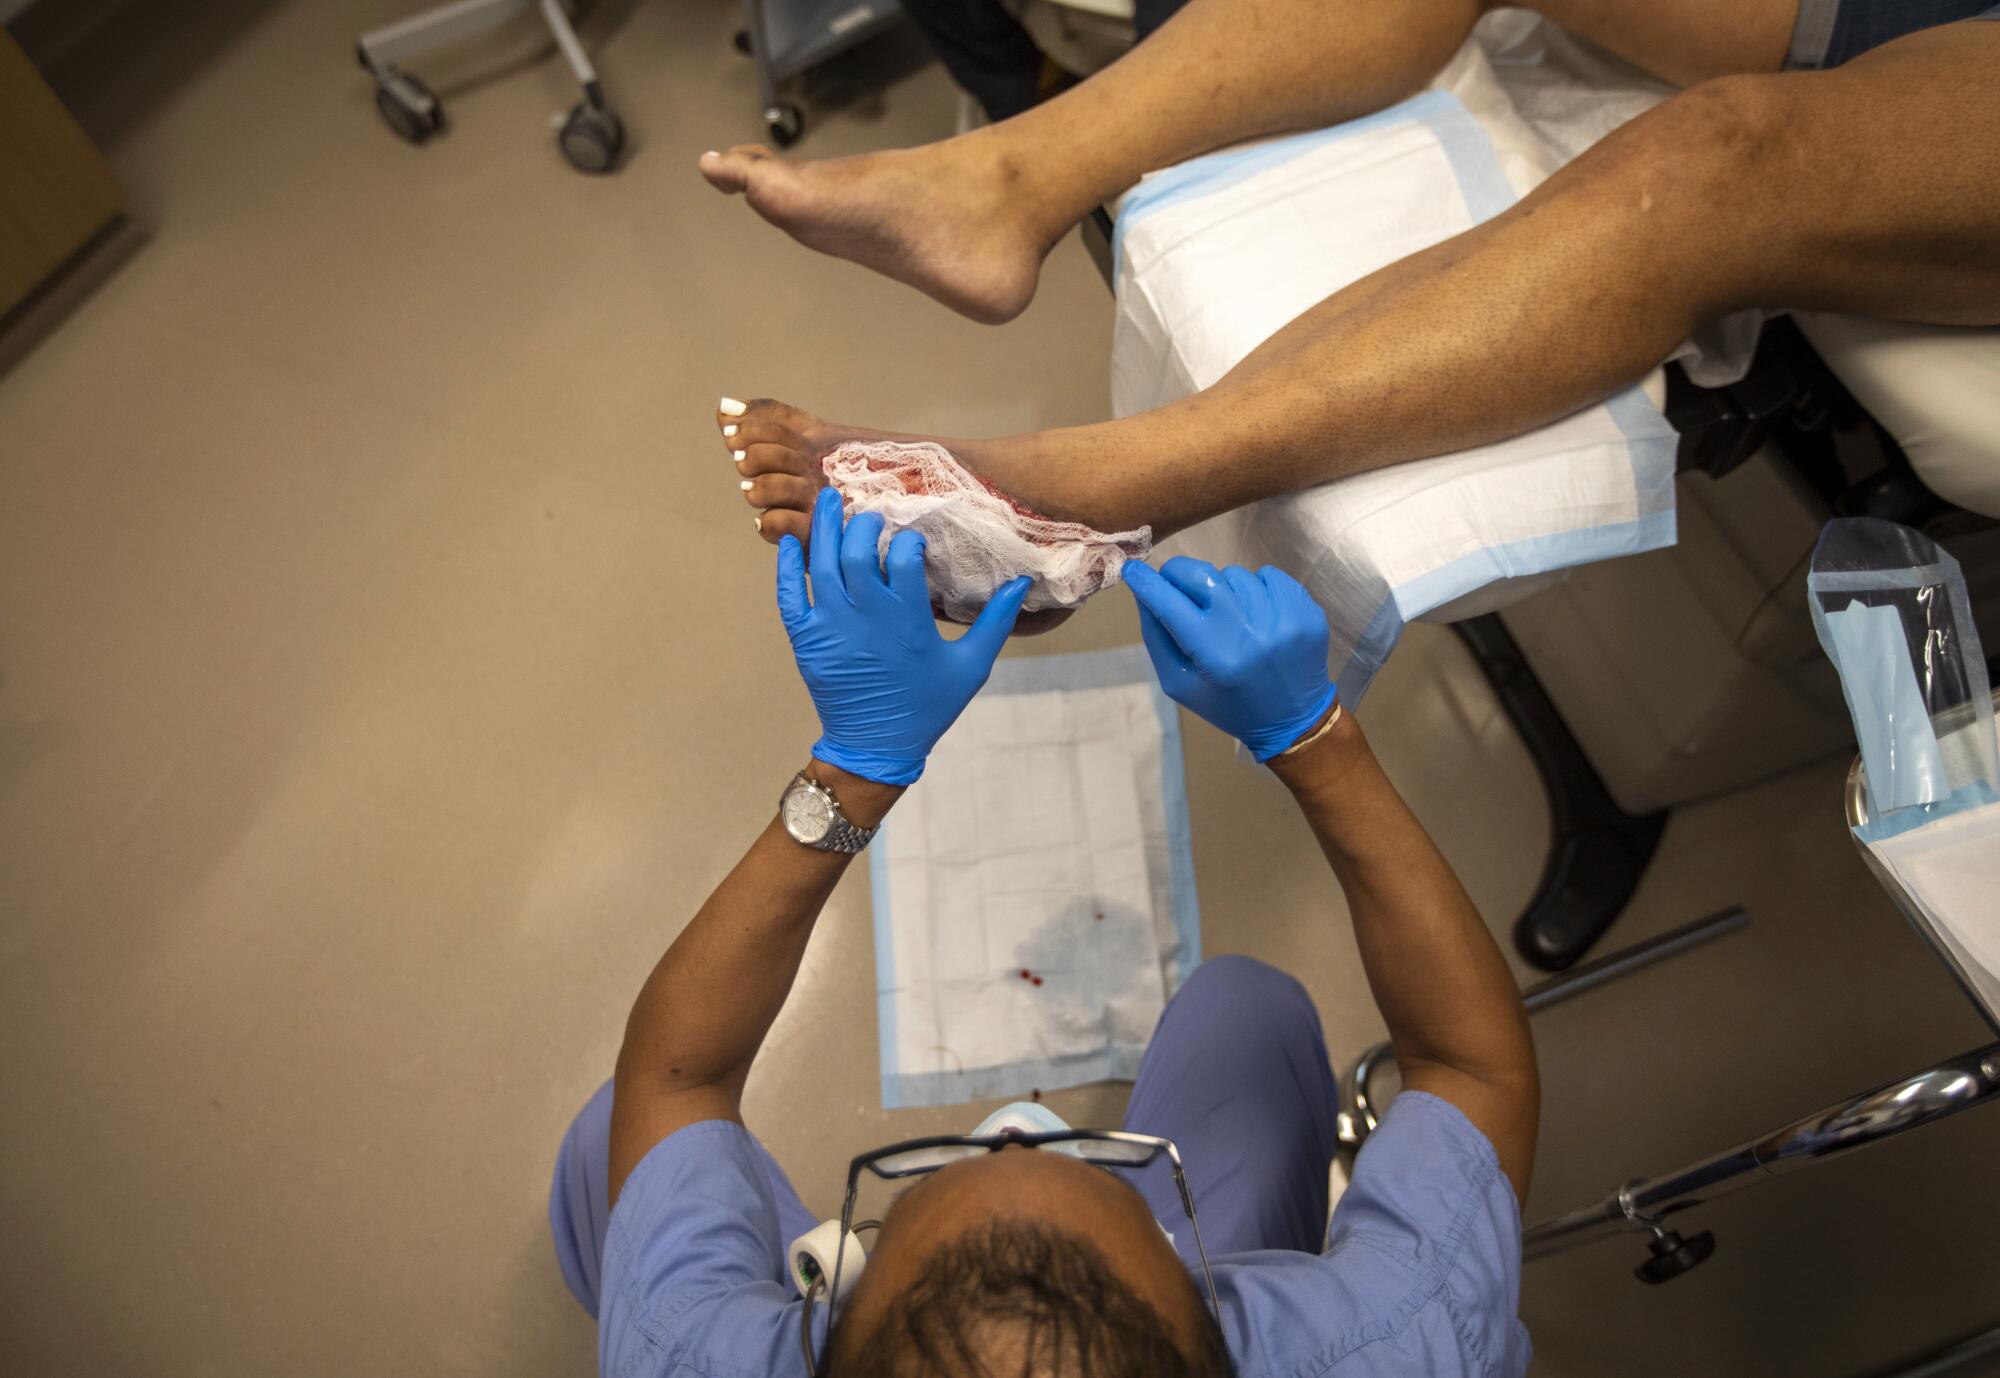 Dr. Myron Hall dresses Sandy Vazquez foot after a procedure at the wound care clinic at Martin Luther King, Jr. 